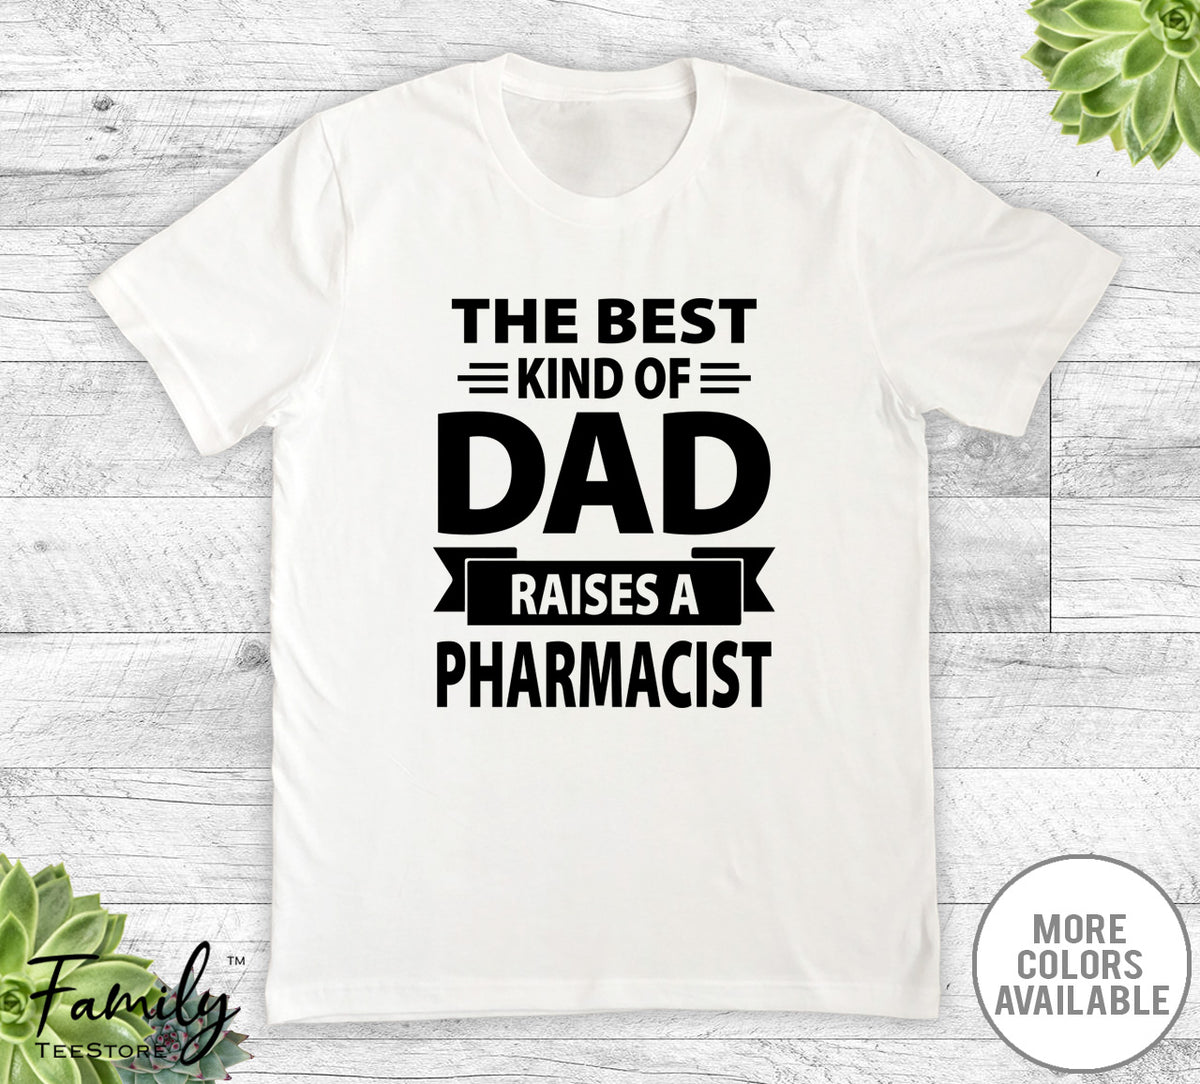 The Best Kind Of Dad Raises A Pharmacist  - Unisex T-shirt - Pharmacist's Dad Shirt - Pharmacist's Dad Gift